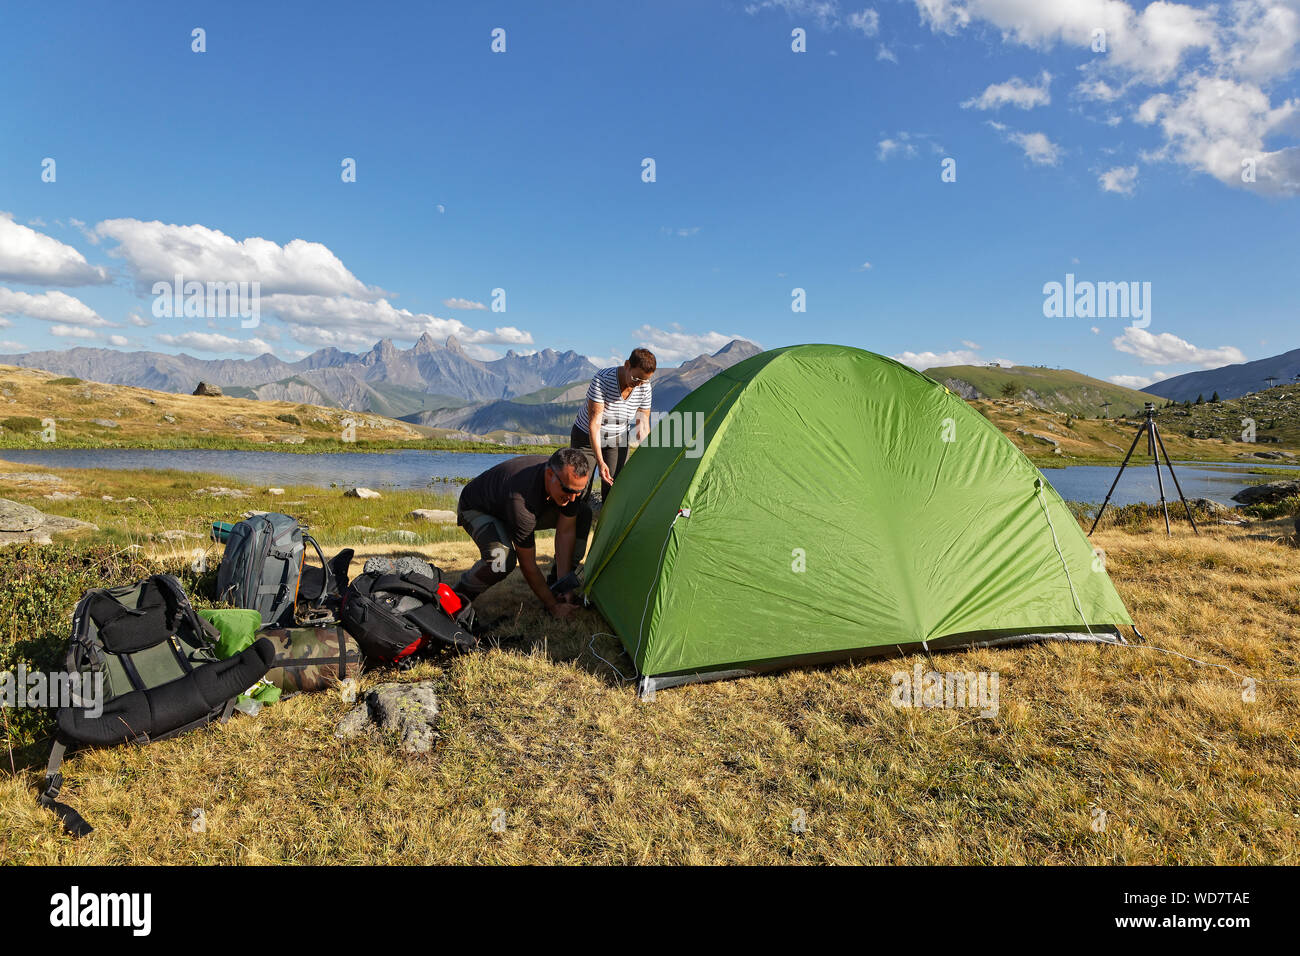 SAINT-SORLIN, FRANCE, August 9, 2019 : Photographers prepare their tent and equipement for a night on a mountain lake shore. Stock Photo